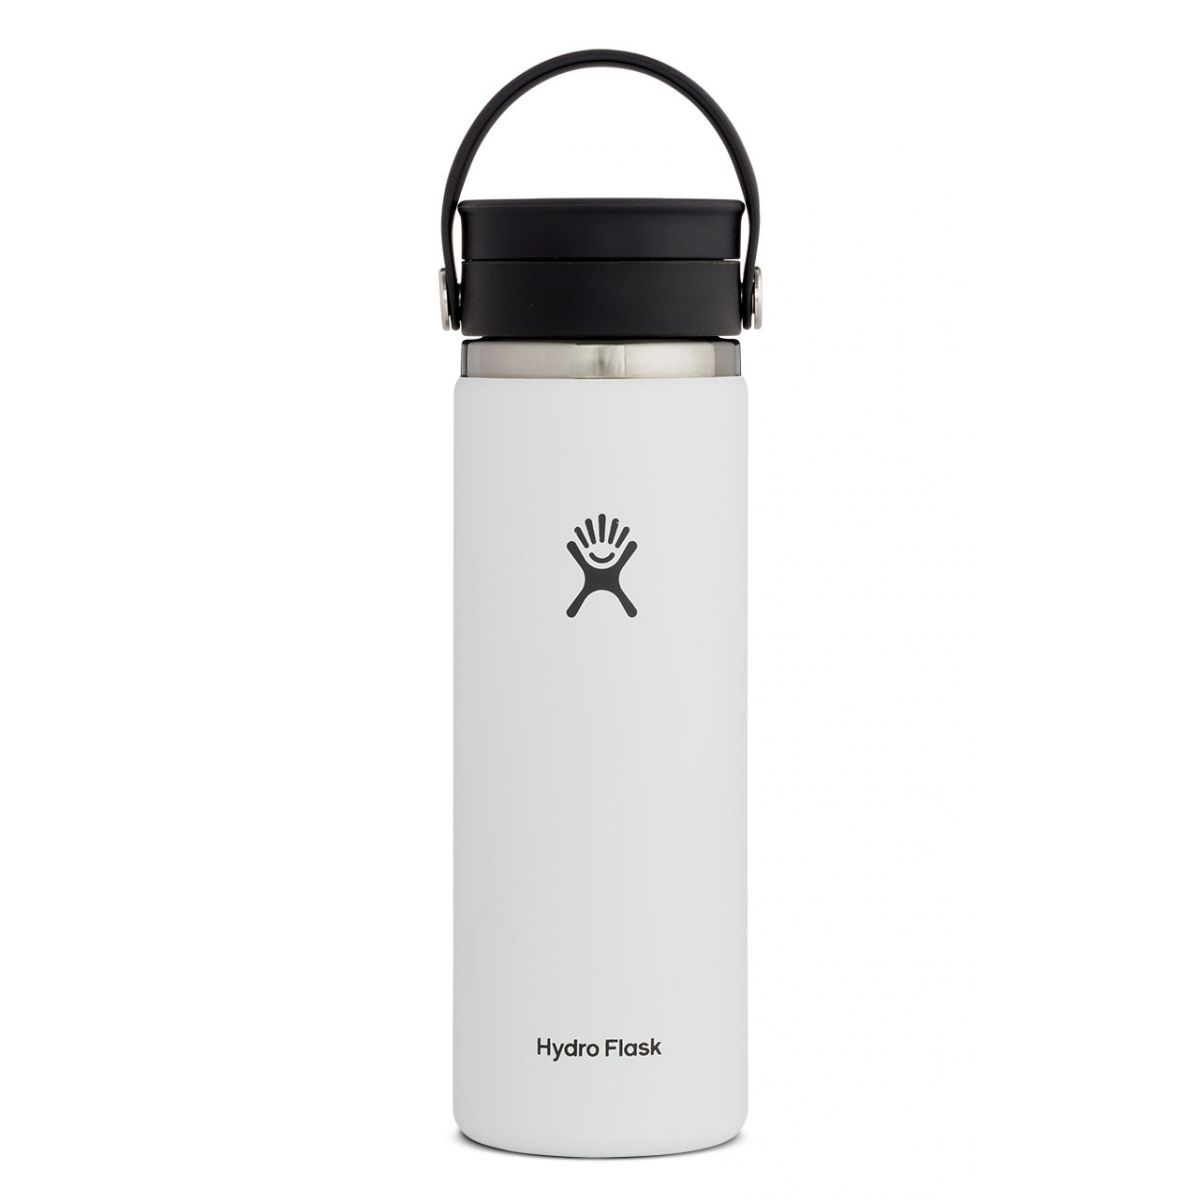 Hydro Flask 20oz Wide Mouth with Flex Sip Lid Accessories Hydro Flask White-110  